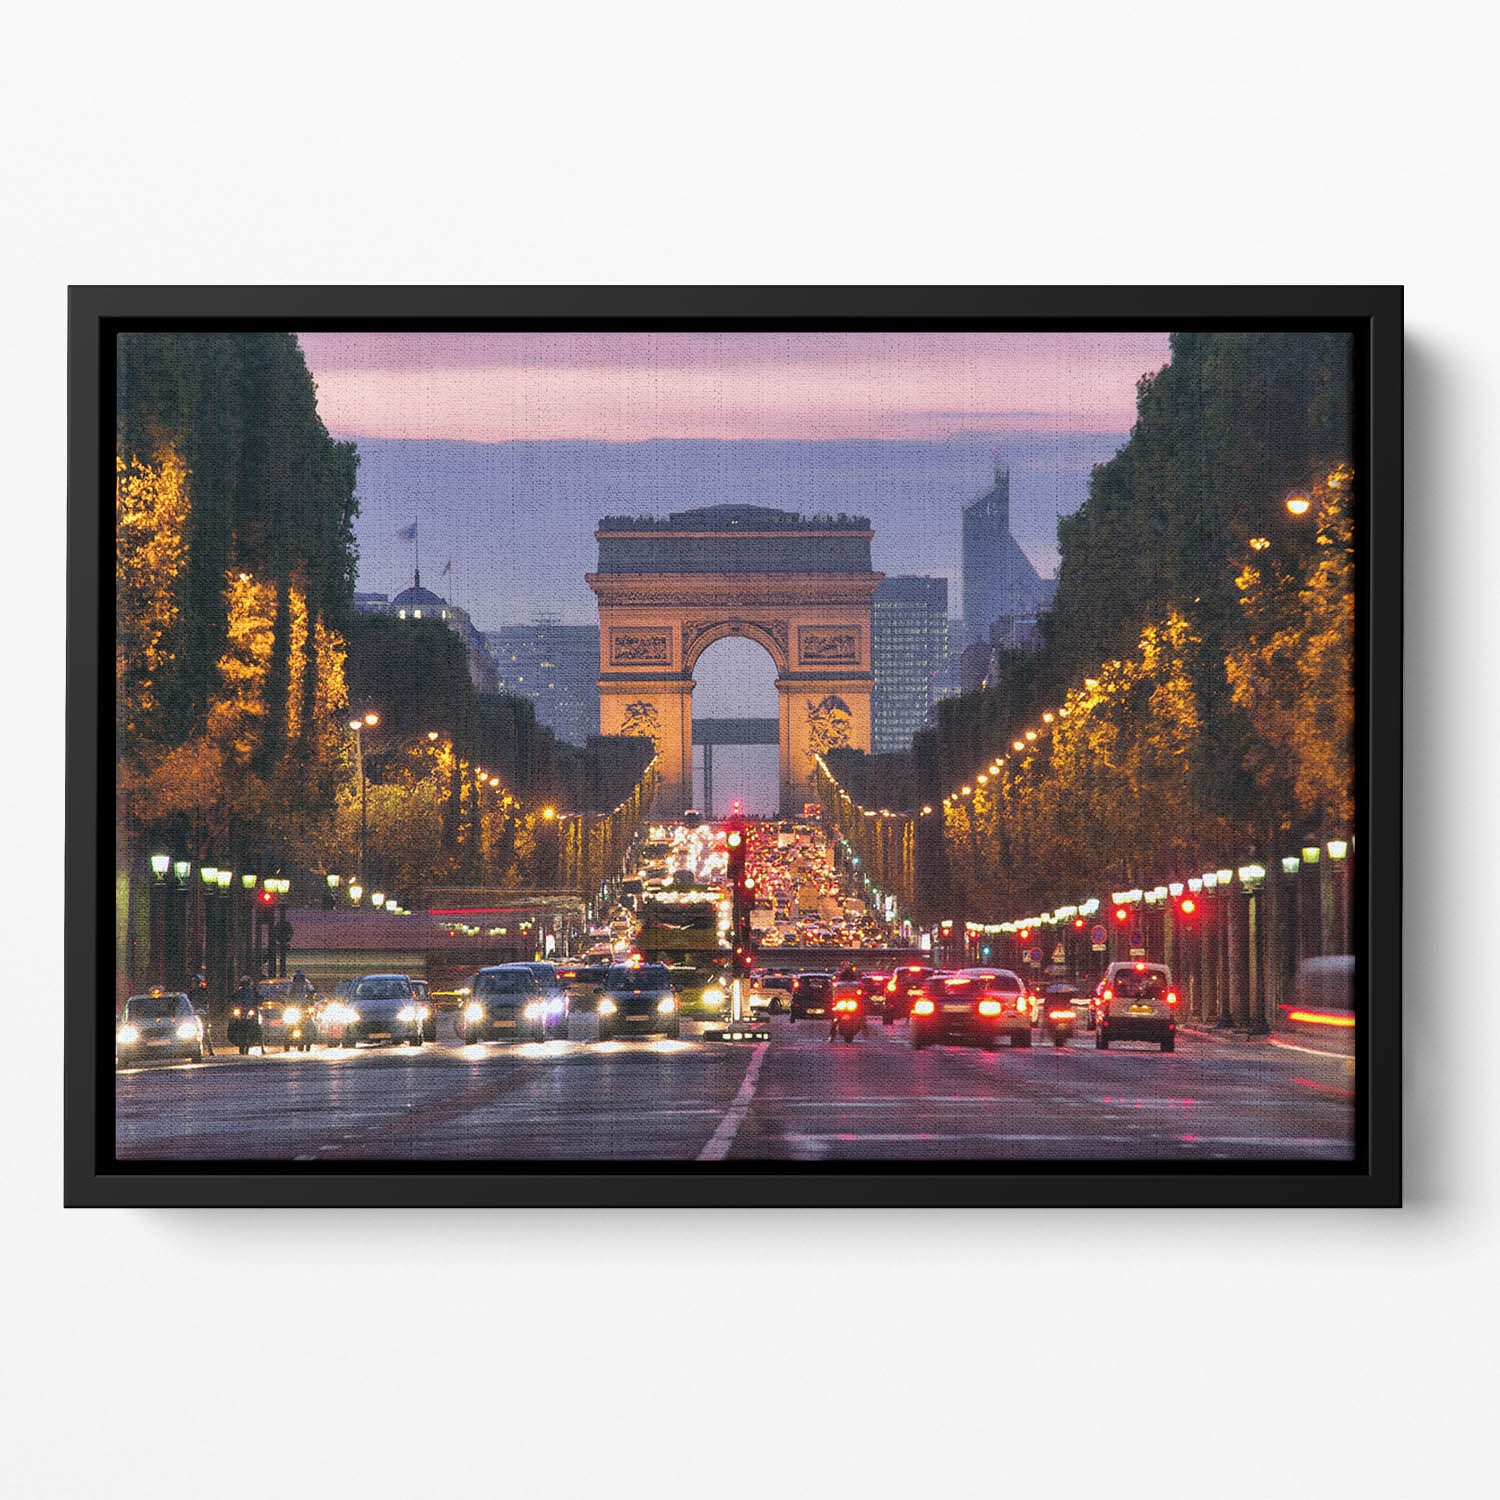 Paris Champs Elysees at night Floating Framed Canvas